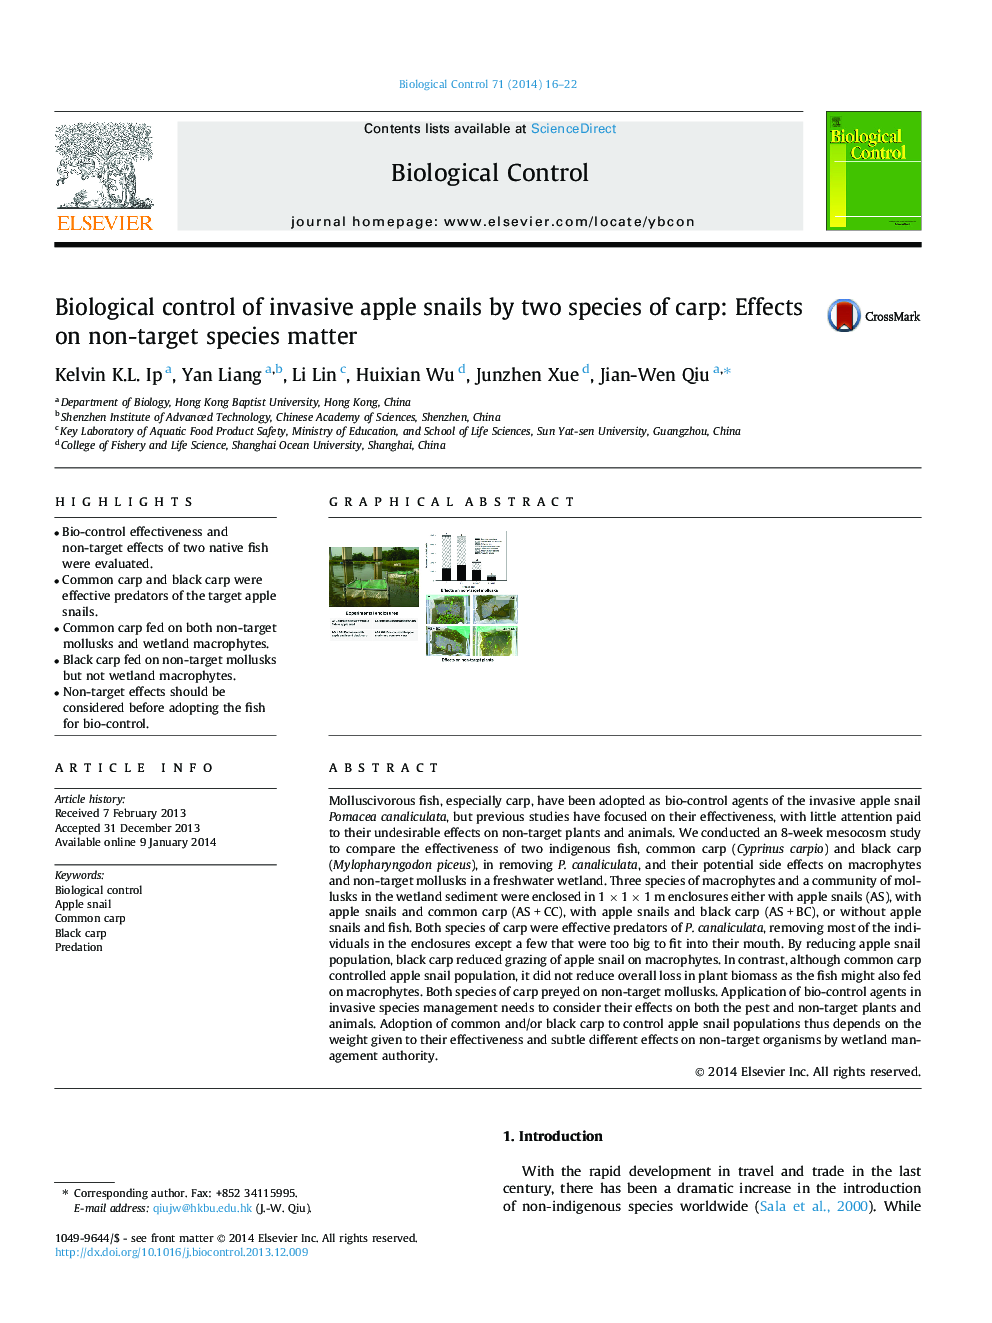 Biological control of invasive apple snails by two species of carp: Effects on non-target species matter